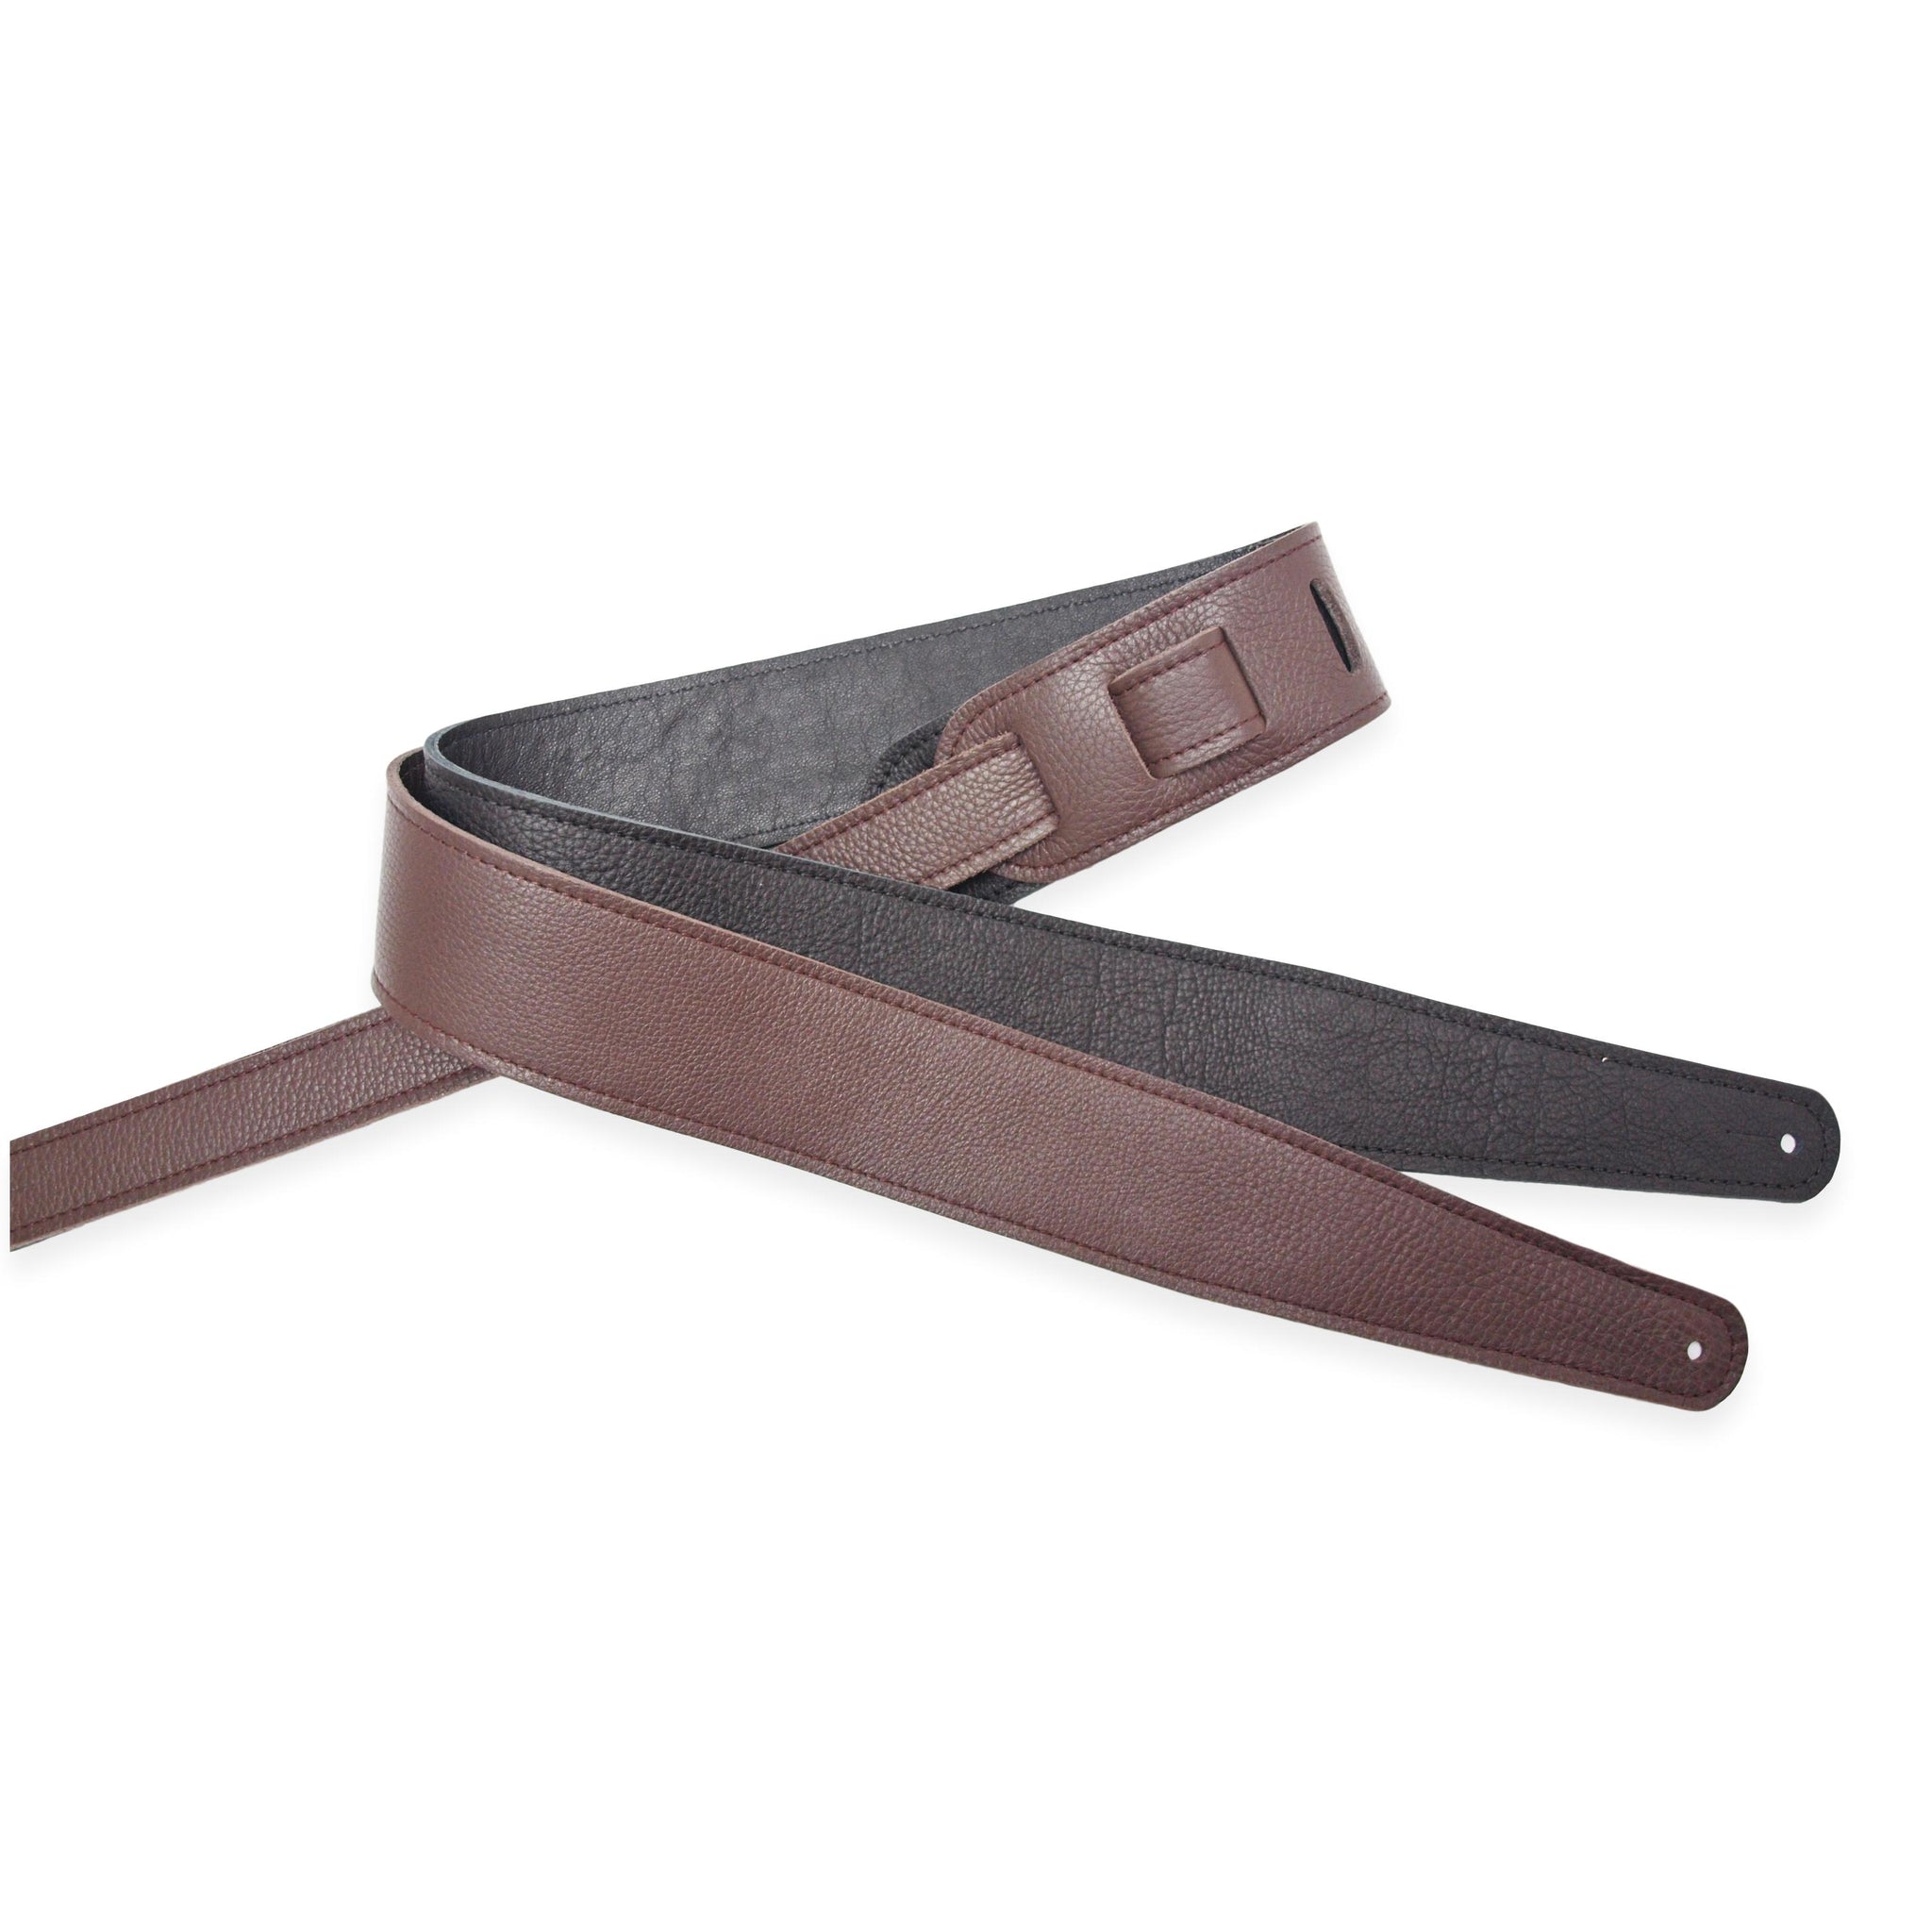 Super Soft Leather Guitar Strap - LM Products